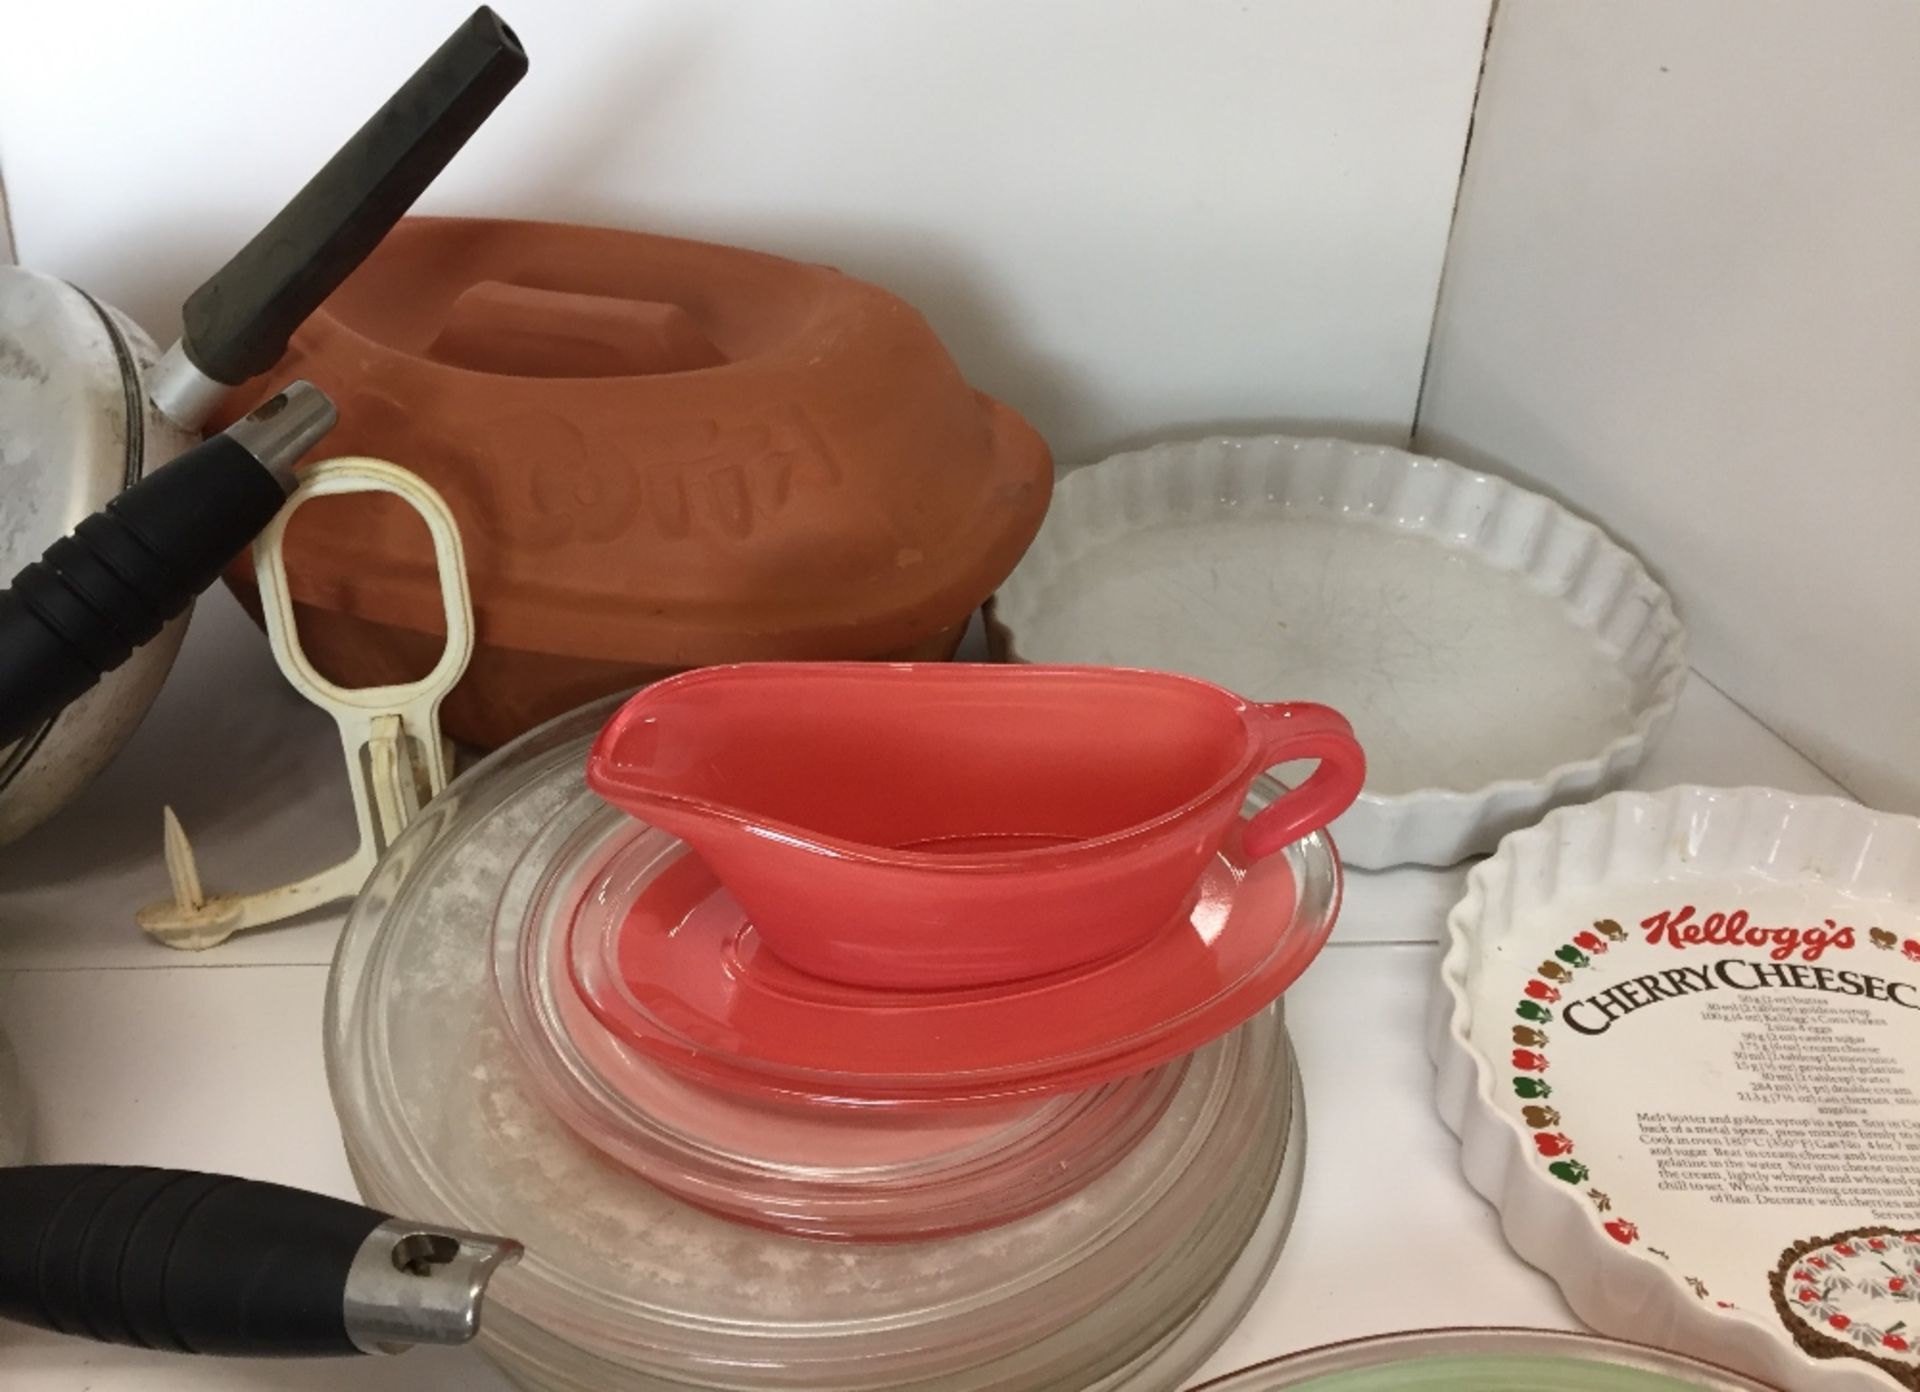 Twenty plus items including thirteen glass oven to tableware plates and gravy boats, - Image 2 of 4